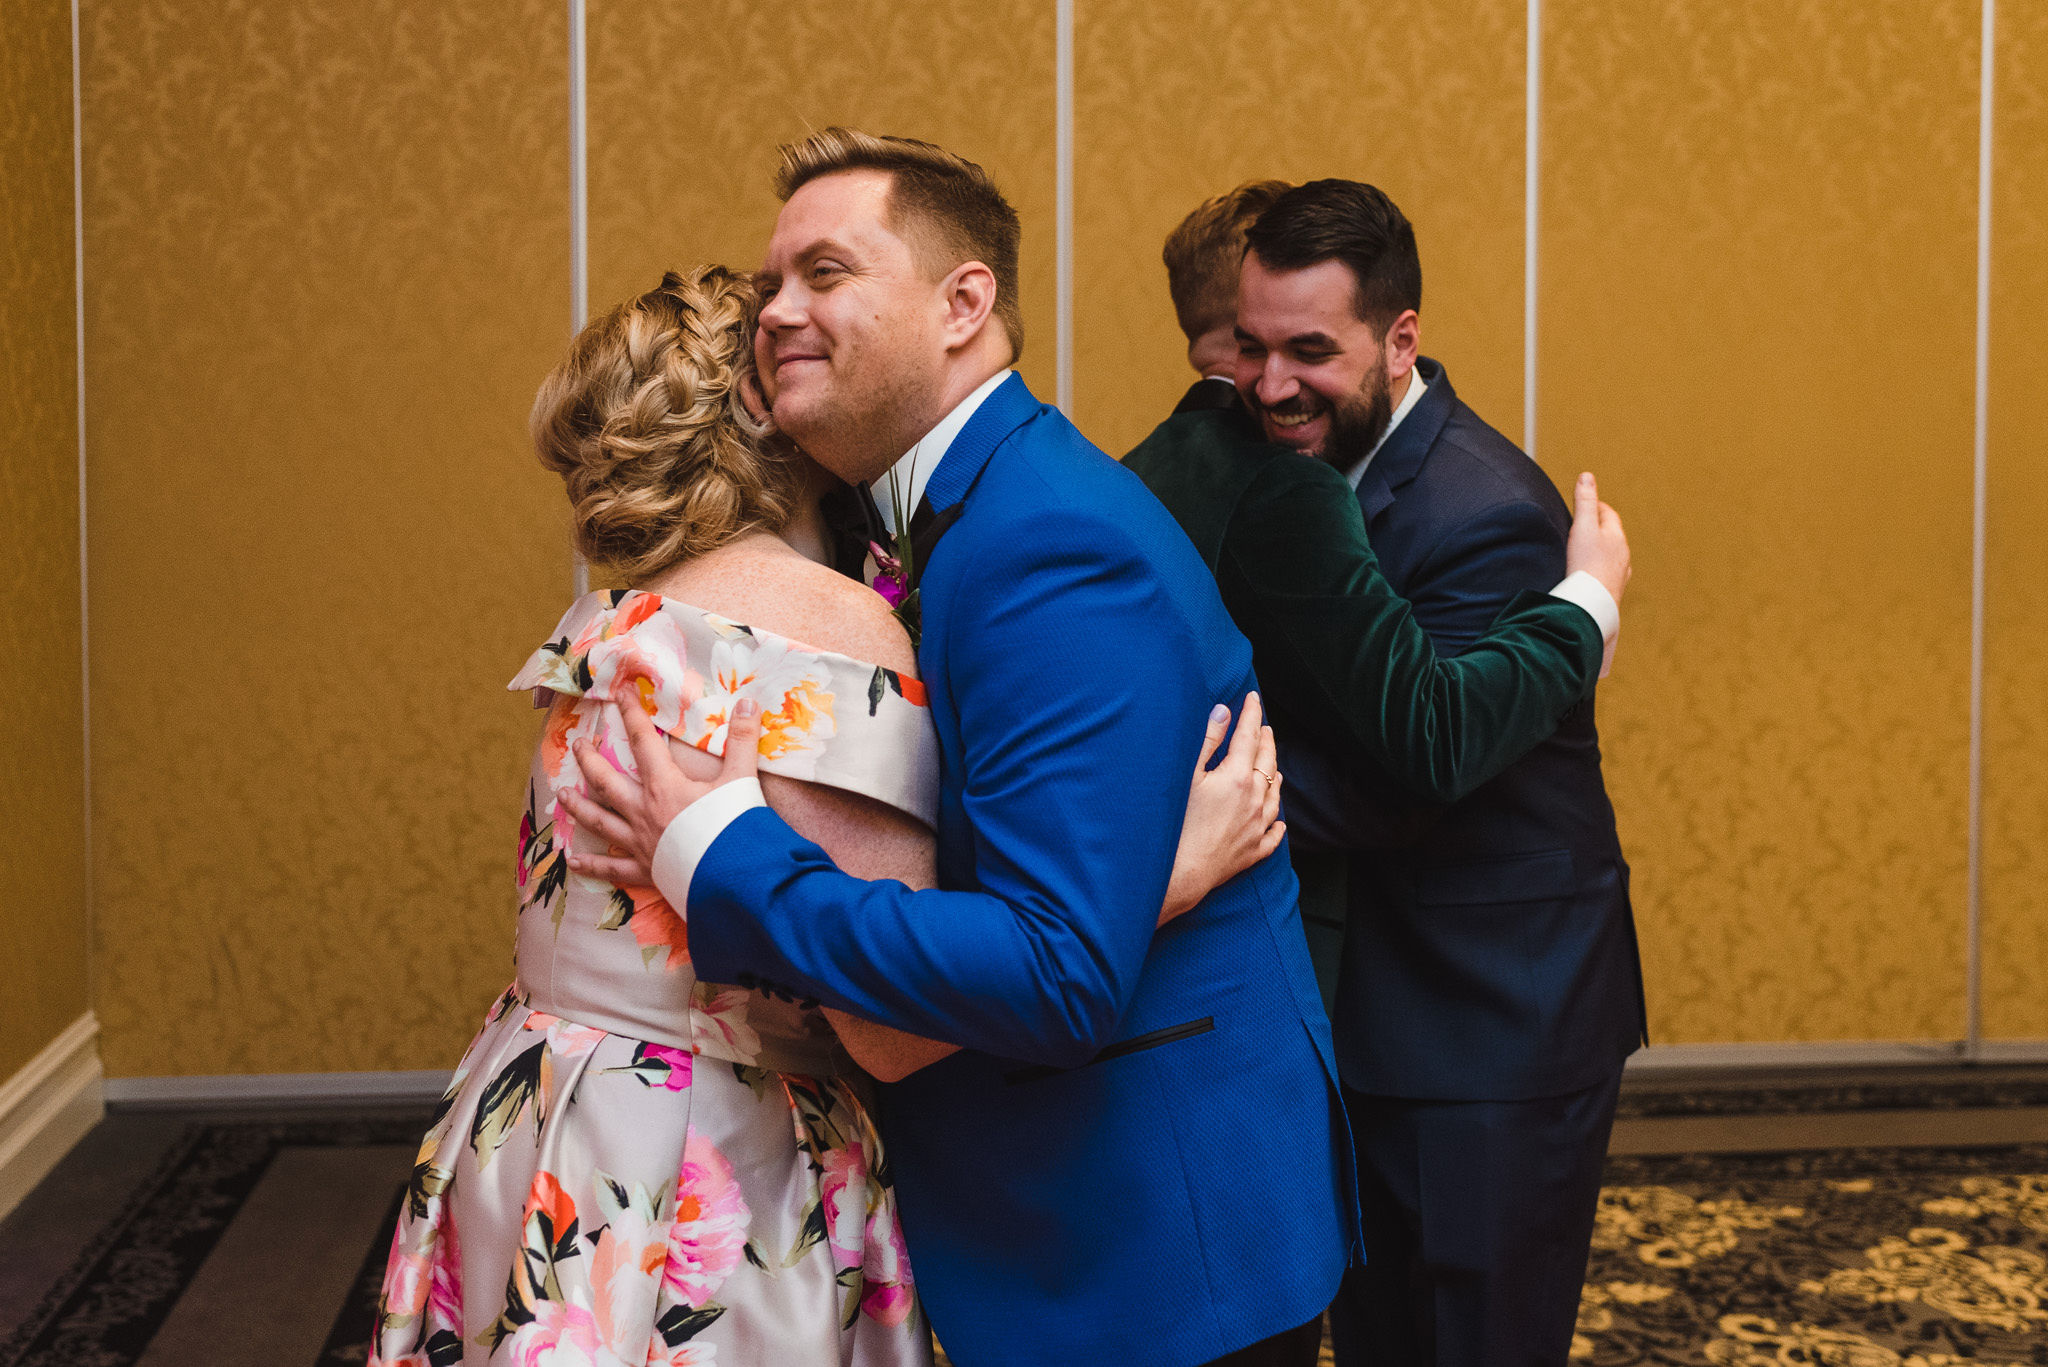 grooms hugging their guests as they arrive in the golden banquet room at the Hilton Fallsview in Niagara Falls